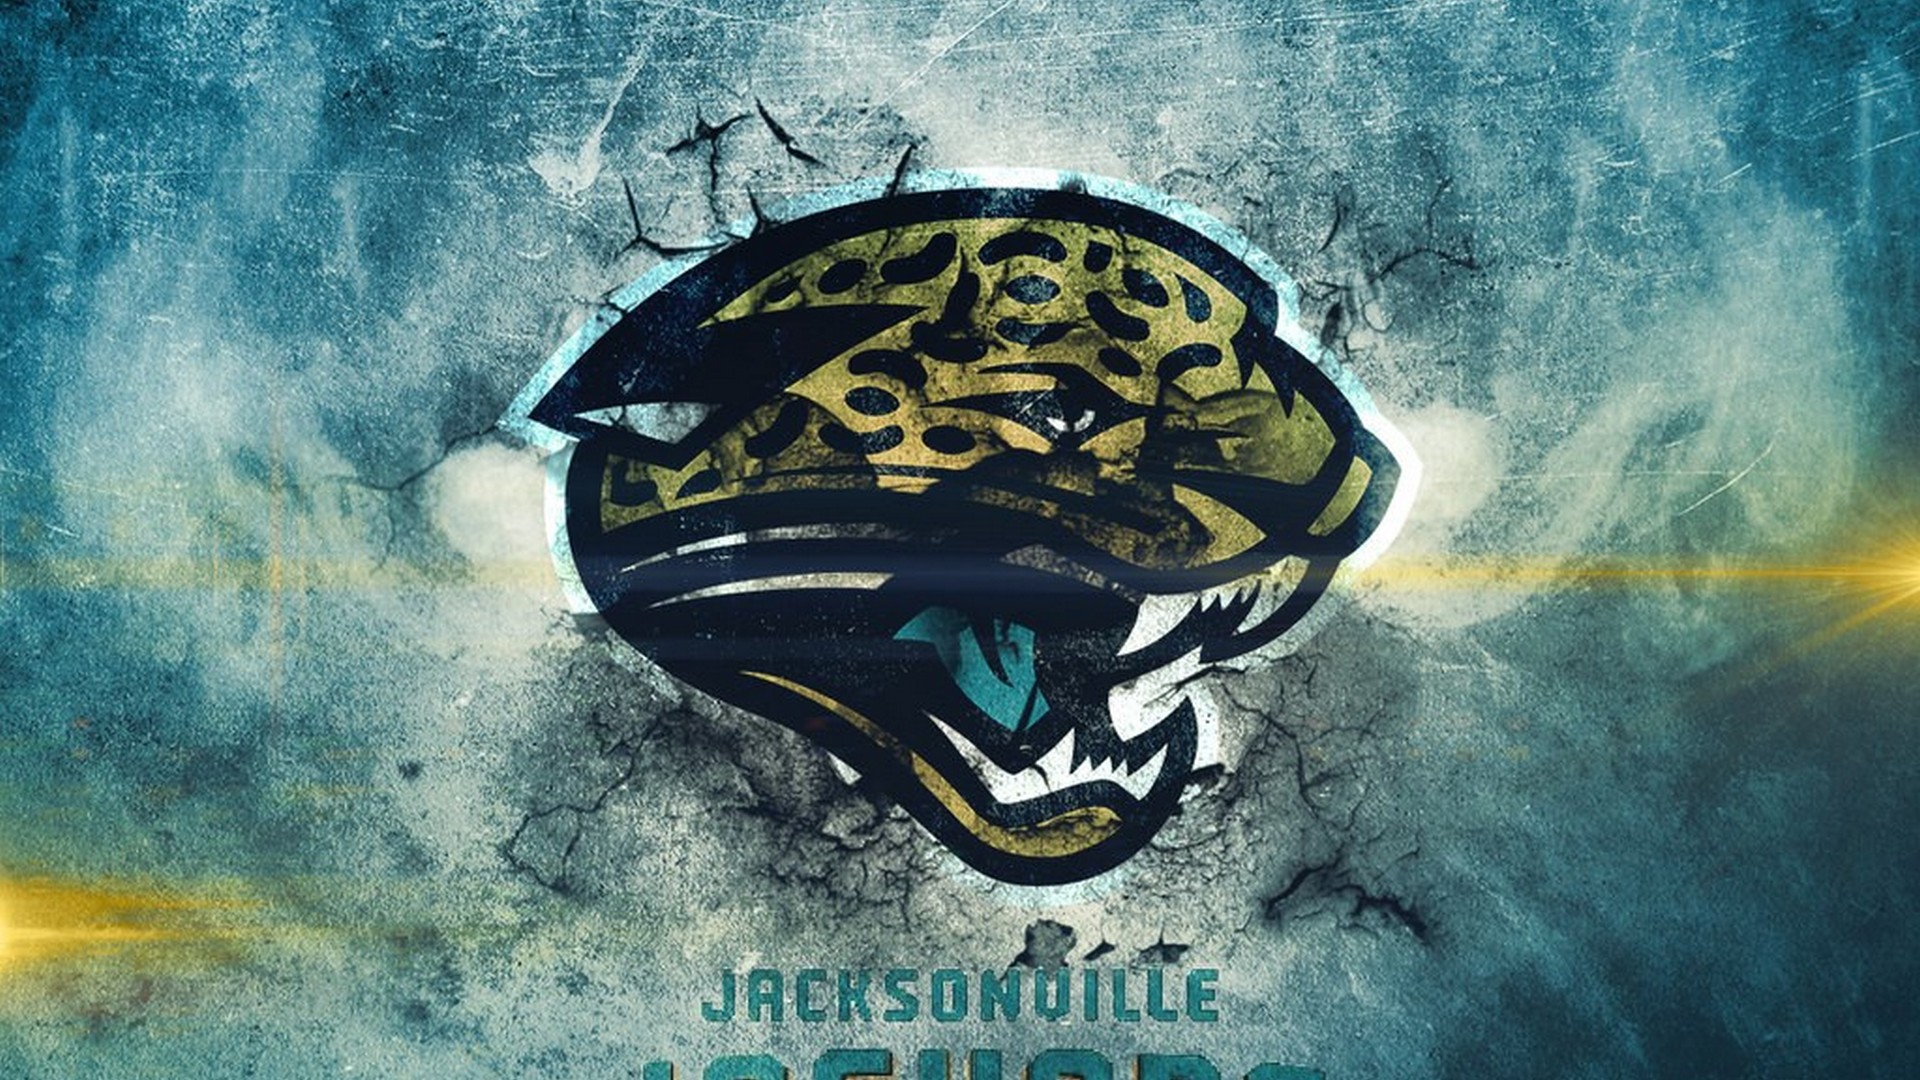 Jacksonville Jaguars Backgrounds HD With Resolution 1920X1080 pixel. You can make this wallpaper for your Mac or Windows Desktop Background, iPhone, Android or Tablet and another Smartphone device for free